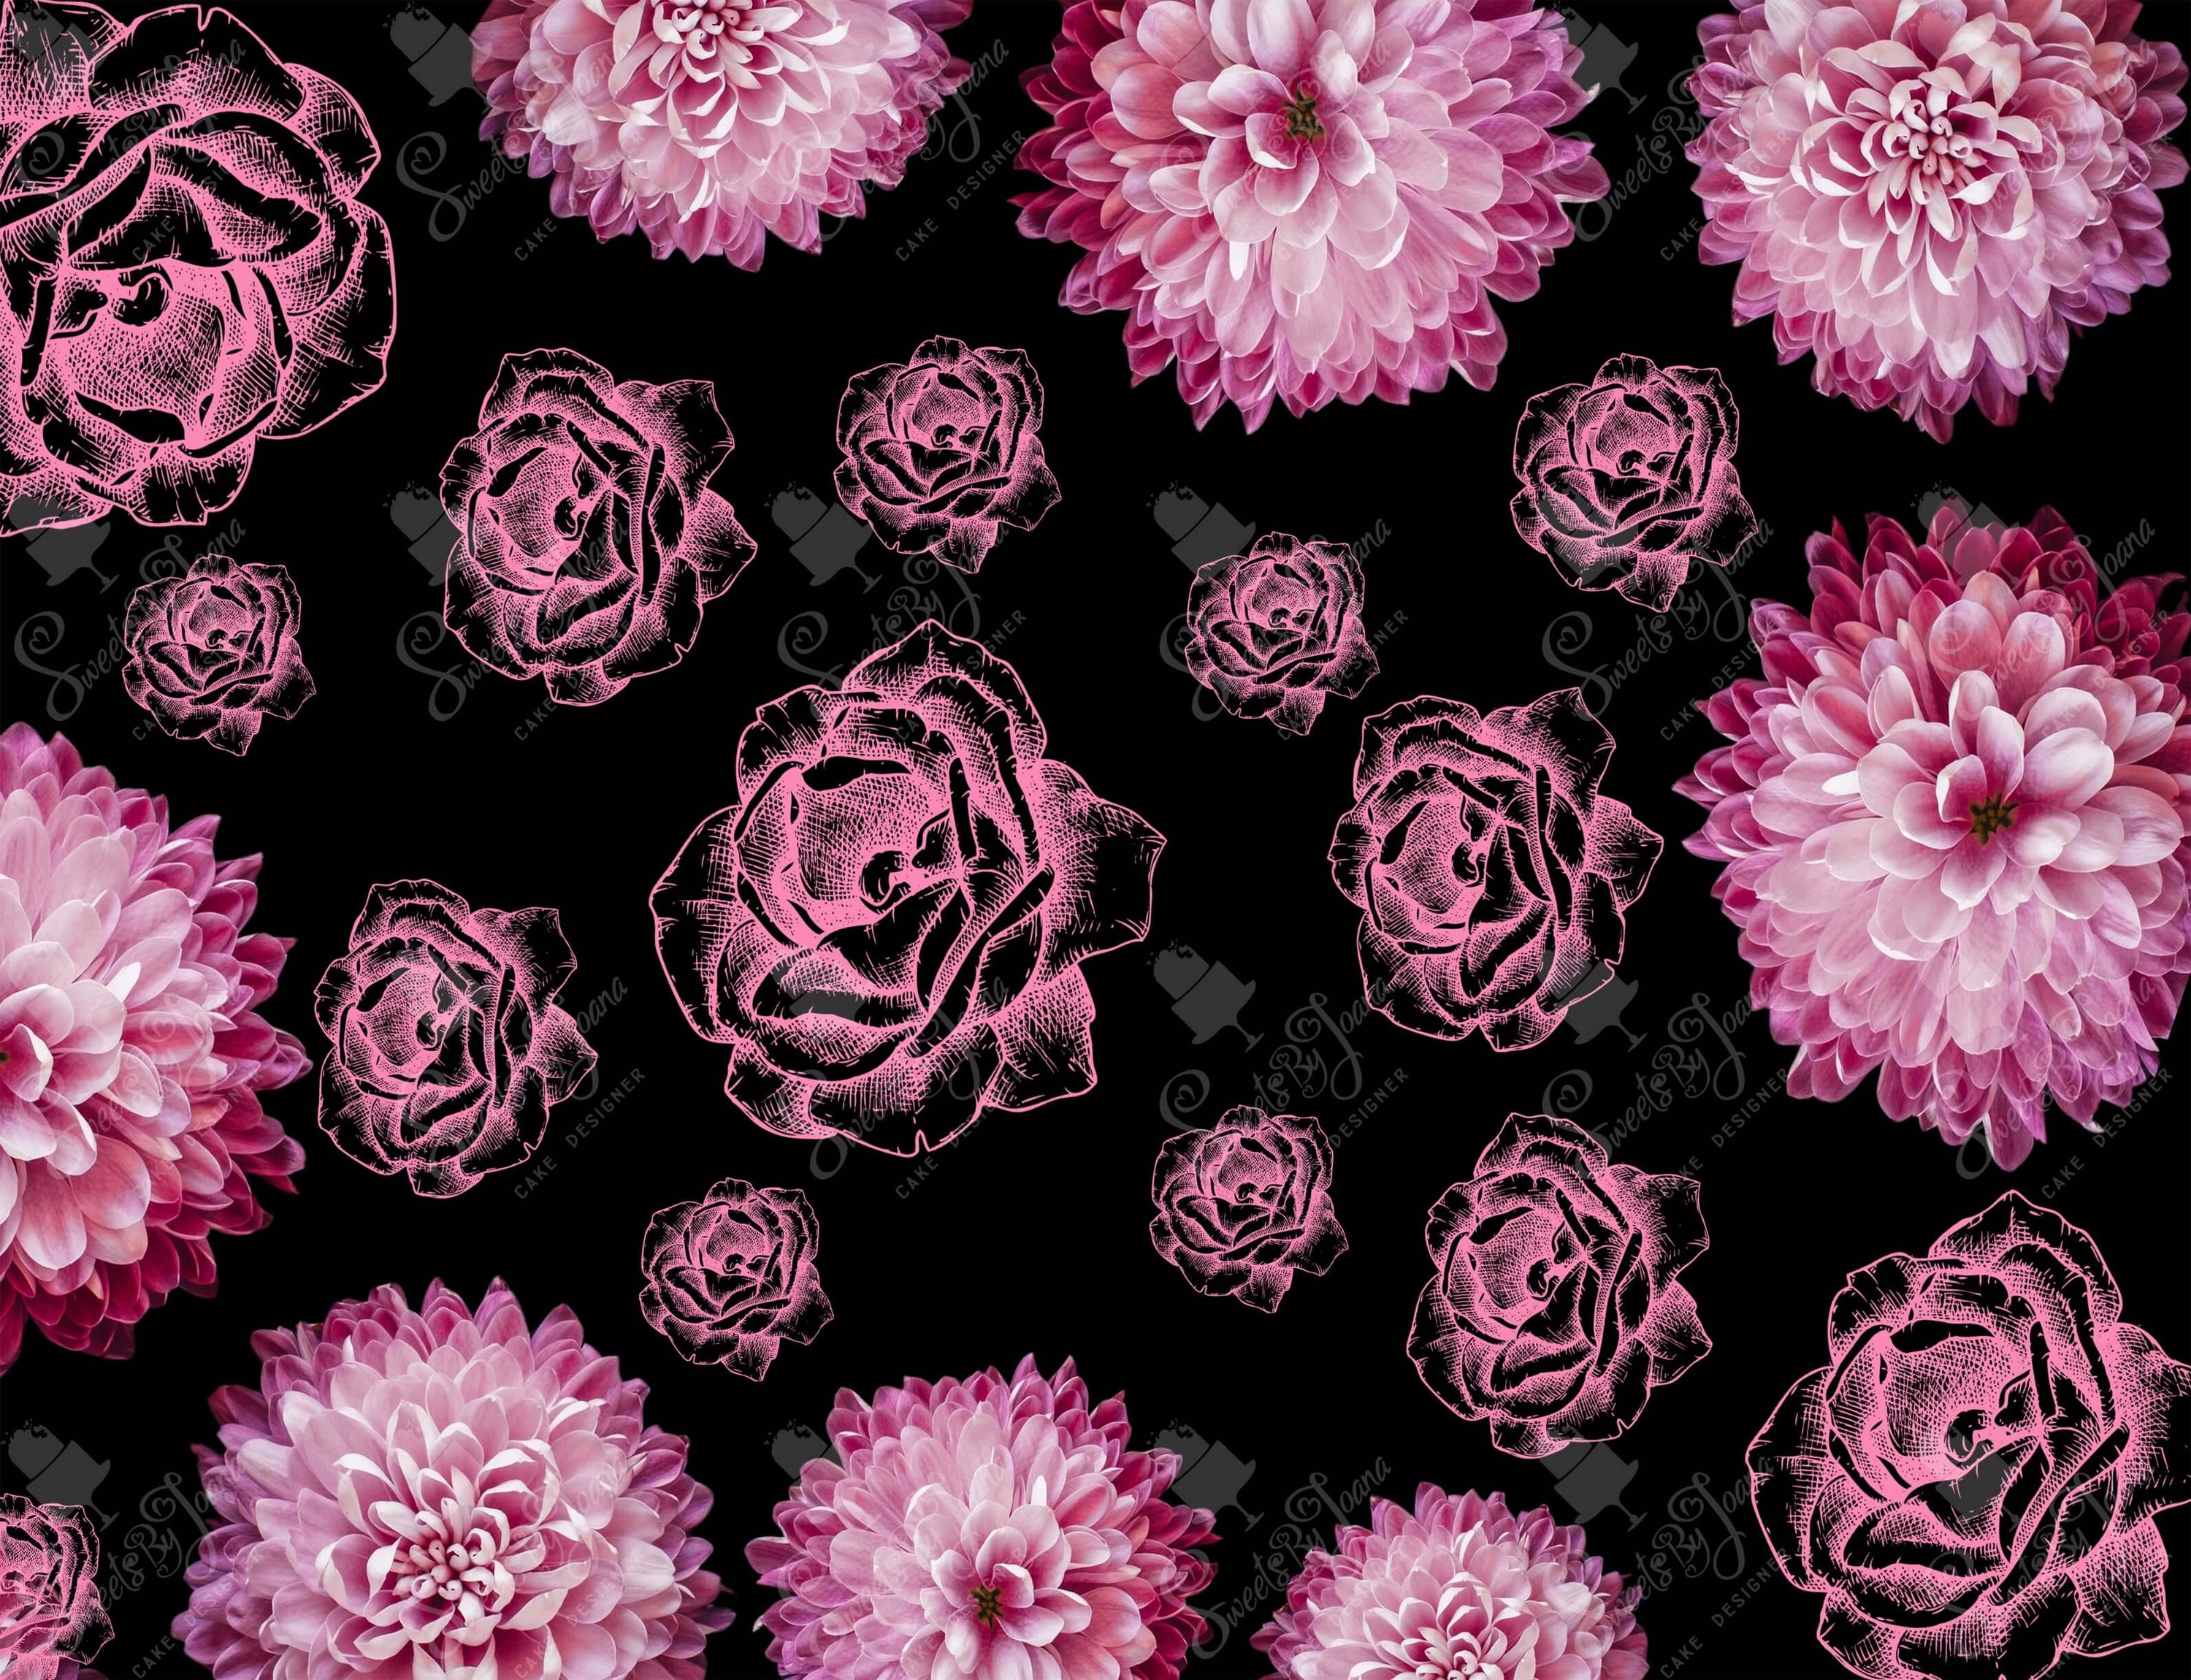 Abstract Pink Flowers - SJSA002